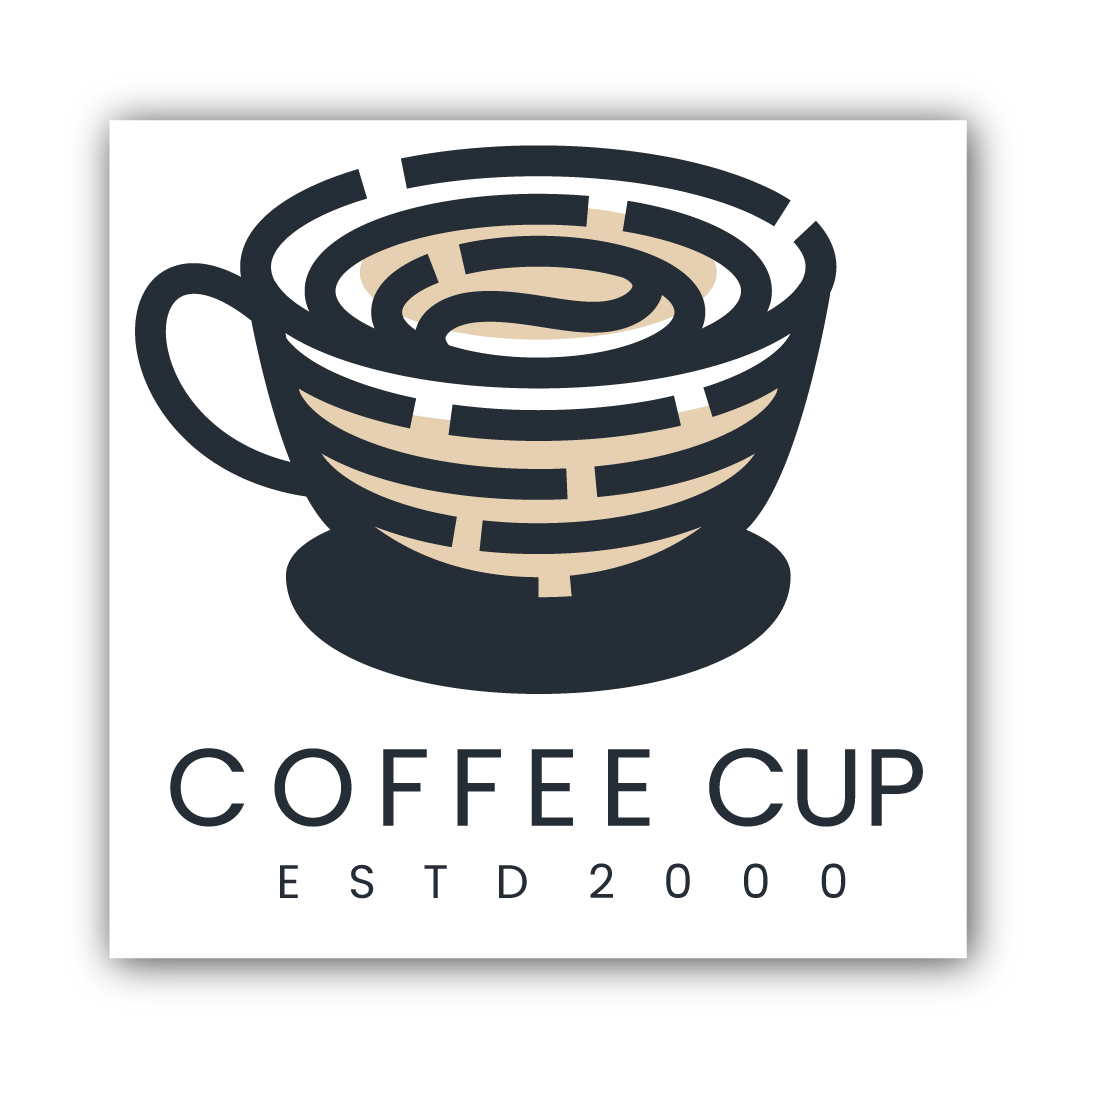 Coffee Cup Logo Design main cover.